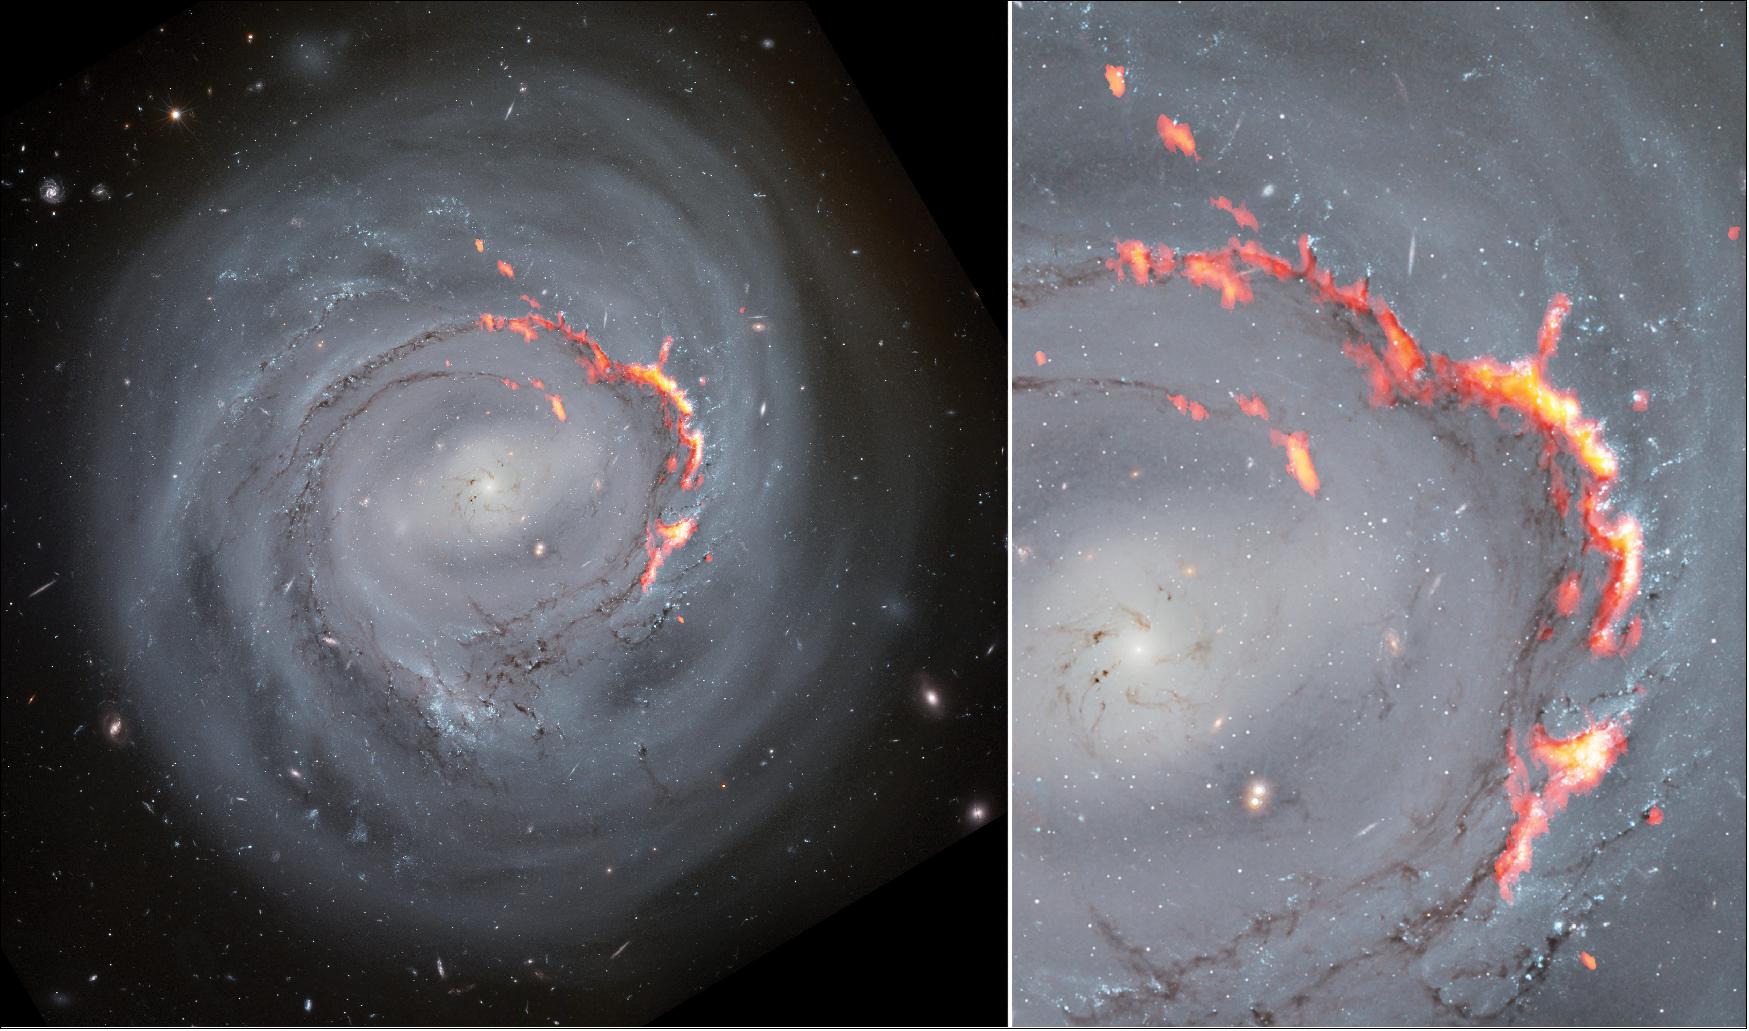 Figure 34: This side-by-side composite shows ALMA (red/orange) data laid over Hubble Space Telescope (optical) images of NGC4921. A new study of the spiral bar galaxy revealed filament structures similar to the Pillars of Creation but significantly larger. These structures are caused by a process known as ram pressure stripping, which pushes gas out of galaxies, leaving them without the material needed to form new stars [image credit: ALMA (ESO/NAOJ/NRAO)/S. Dagnello (NRAO), NASA/ESA/Hubble/K. Cook (LLNL), L. Shatz]